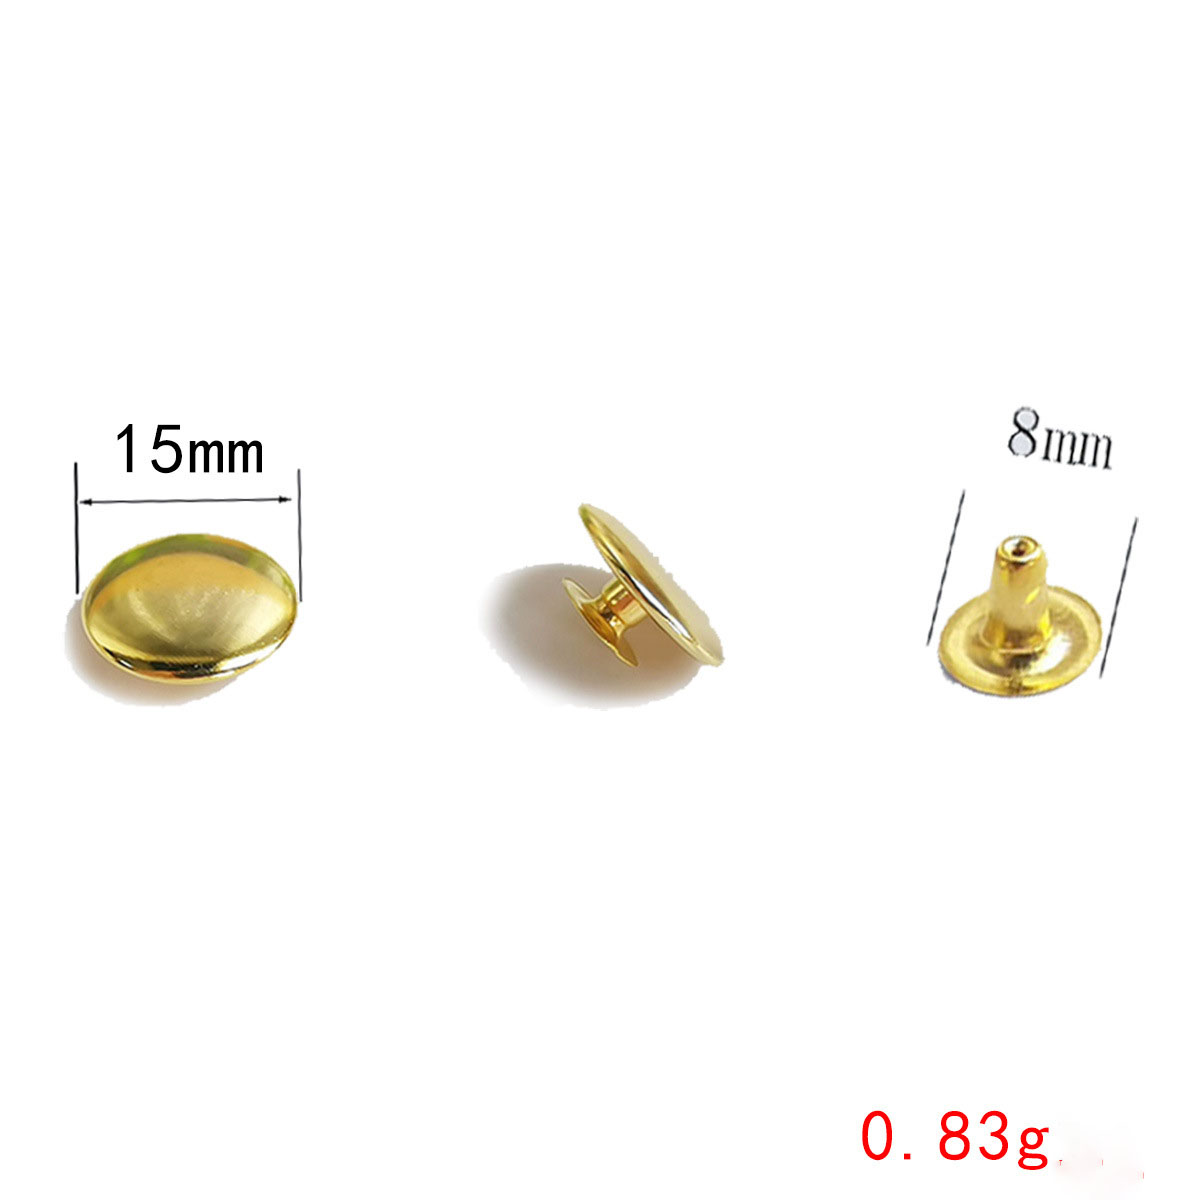 15mm gold